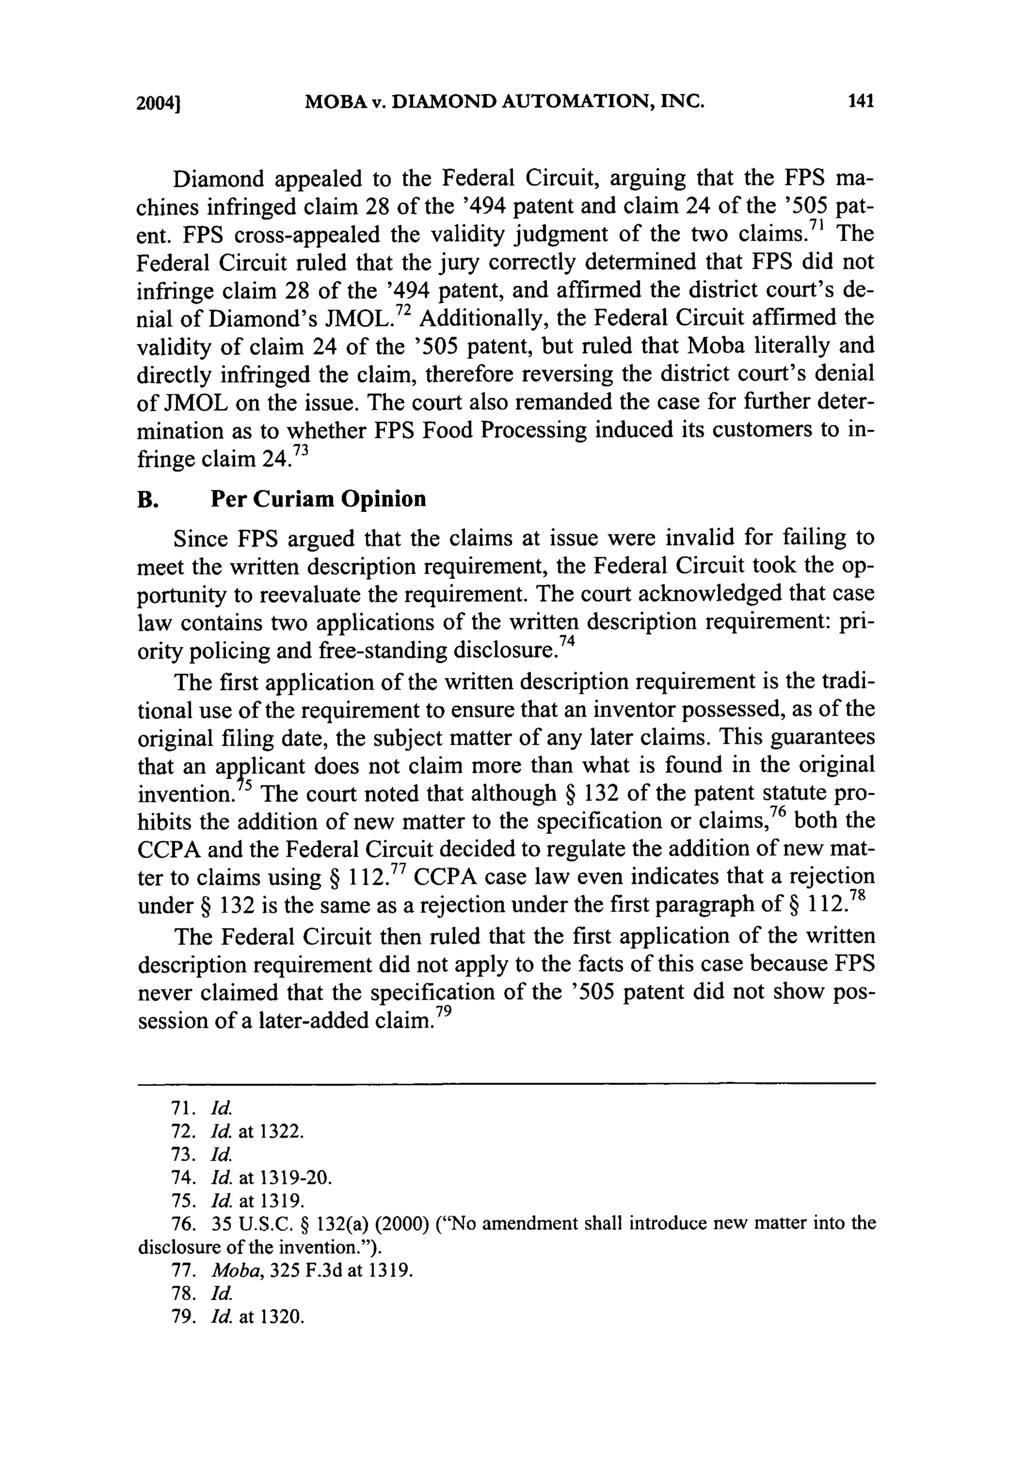 20041 MOBA v. DIAMOND AUTOMATION, INC. Diamond appealed to the Federal Circuit, arguing that the FPS machines infringed claim 28 of the '494 patent and claim 24 of the '505 patent.